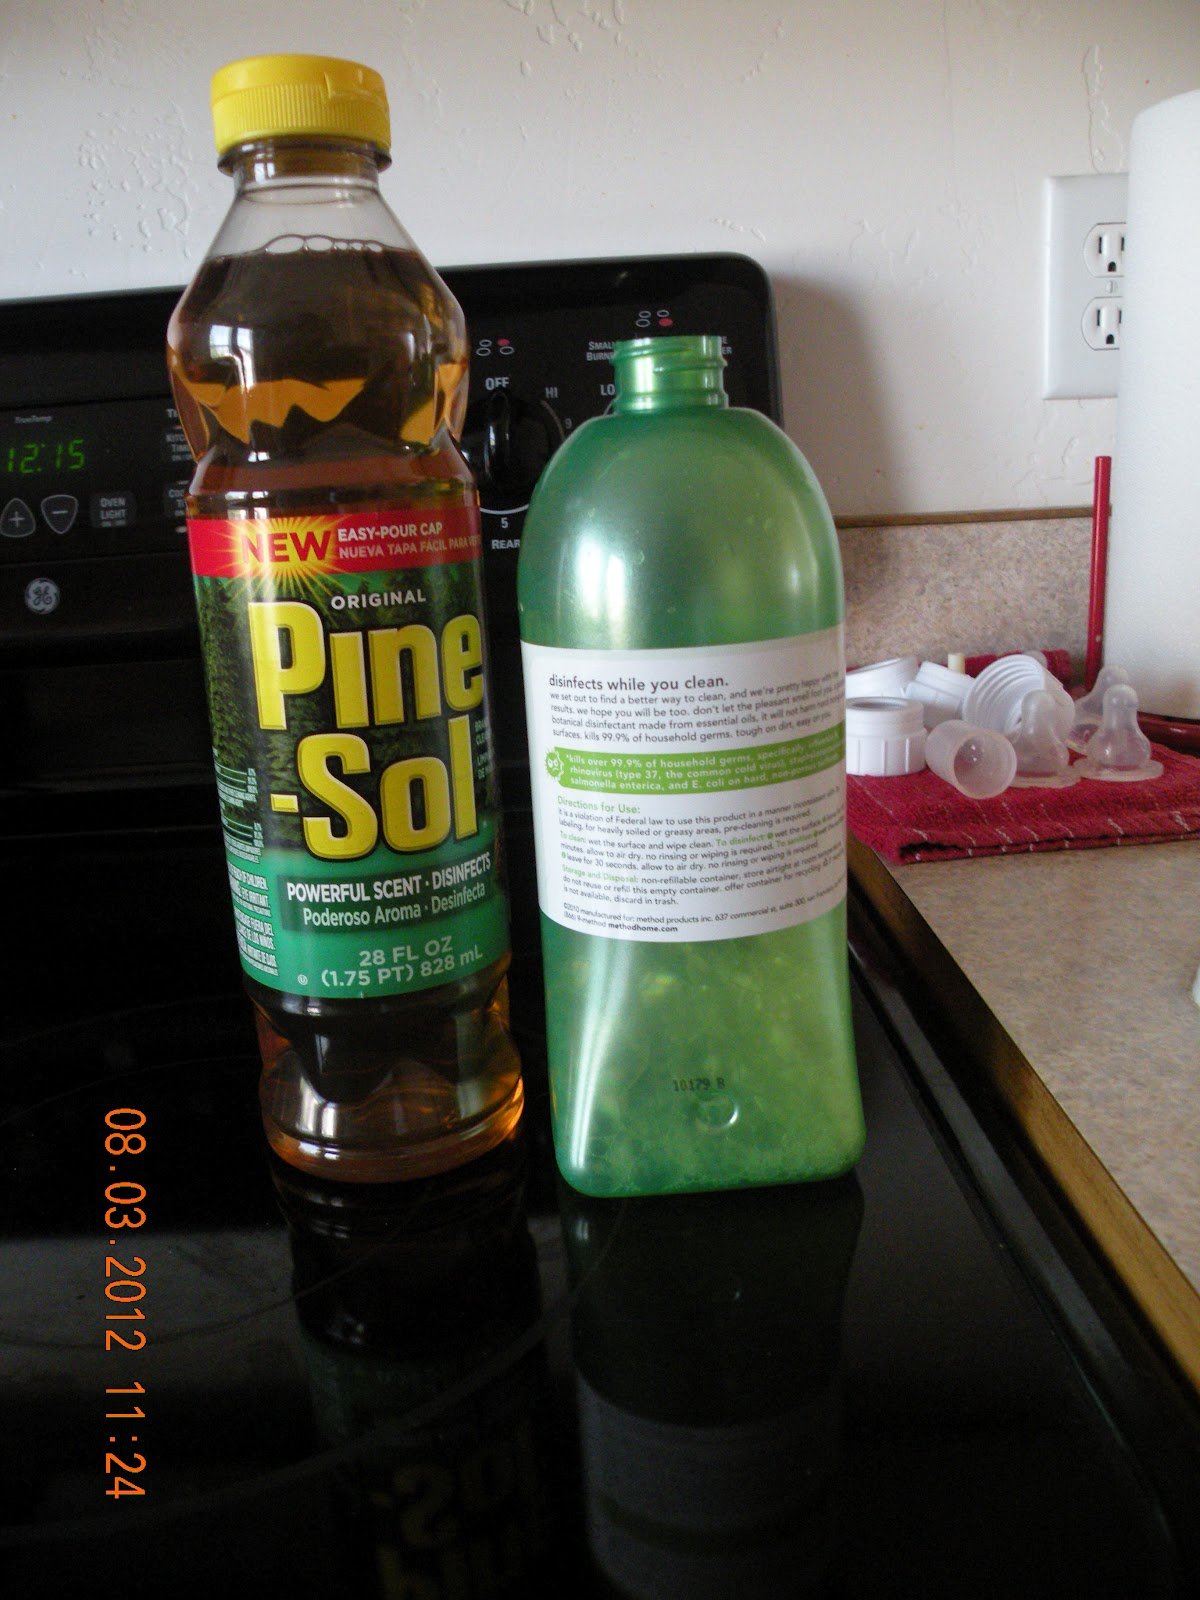 Pintology: Pine Sol as Fly Repellant